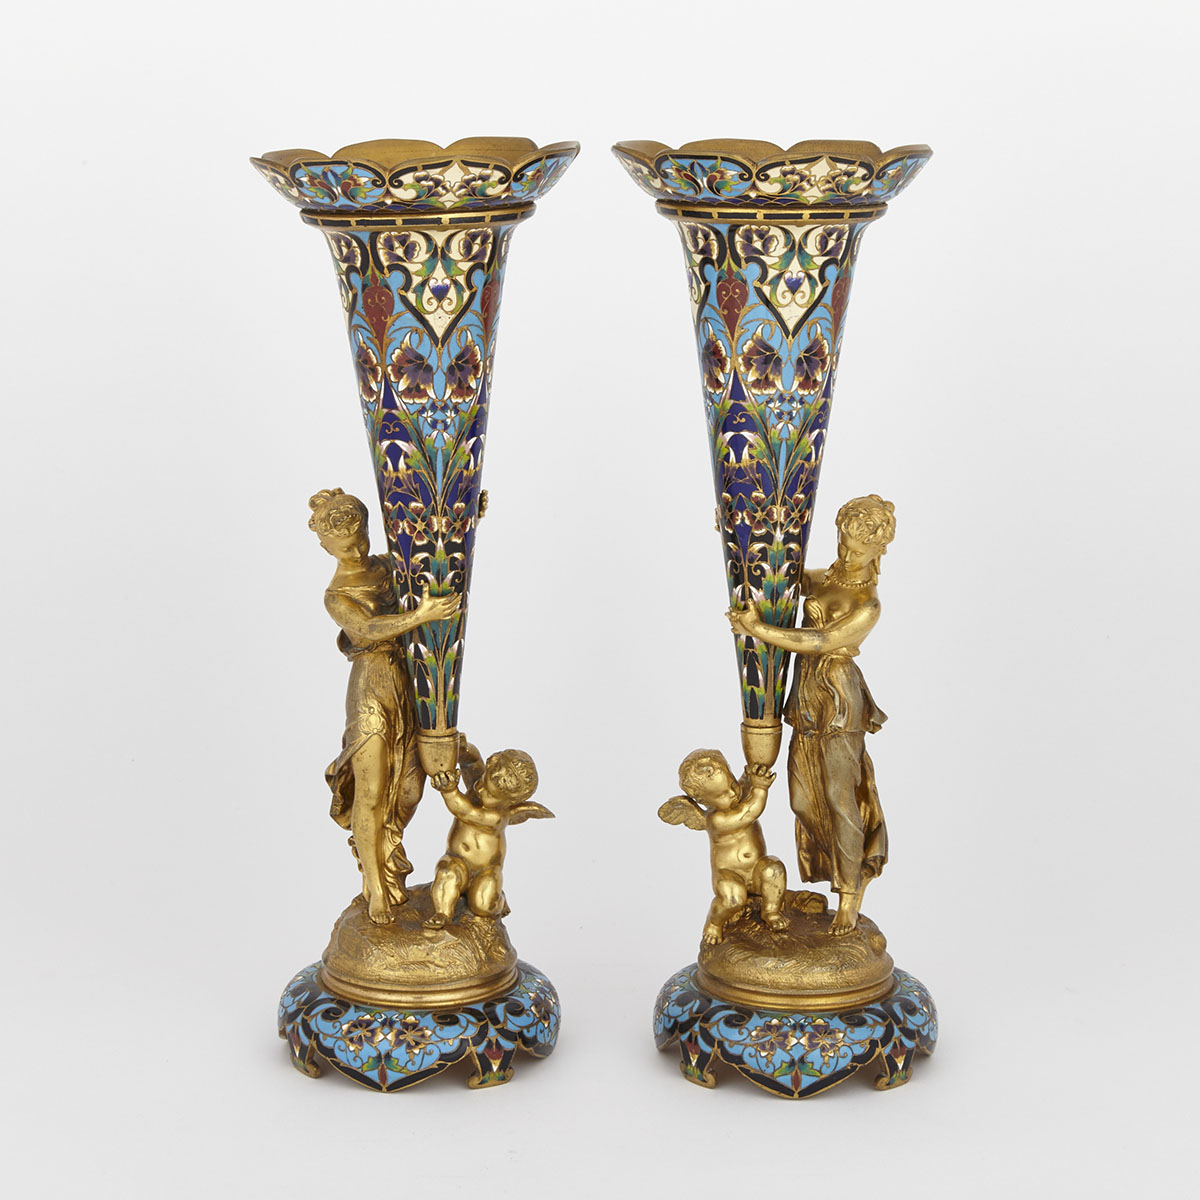 Pair of French Gilt Bronze and Champlevé Enamelled Figural Vases, c.1870